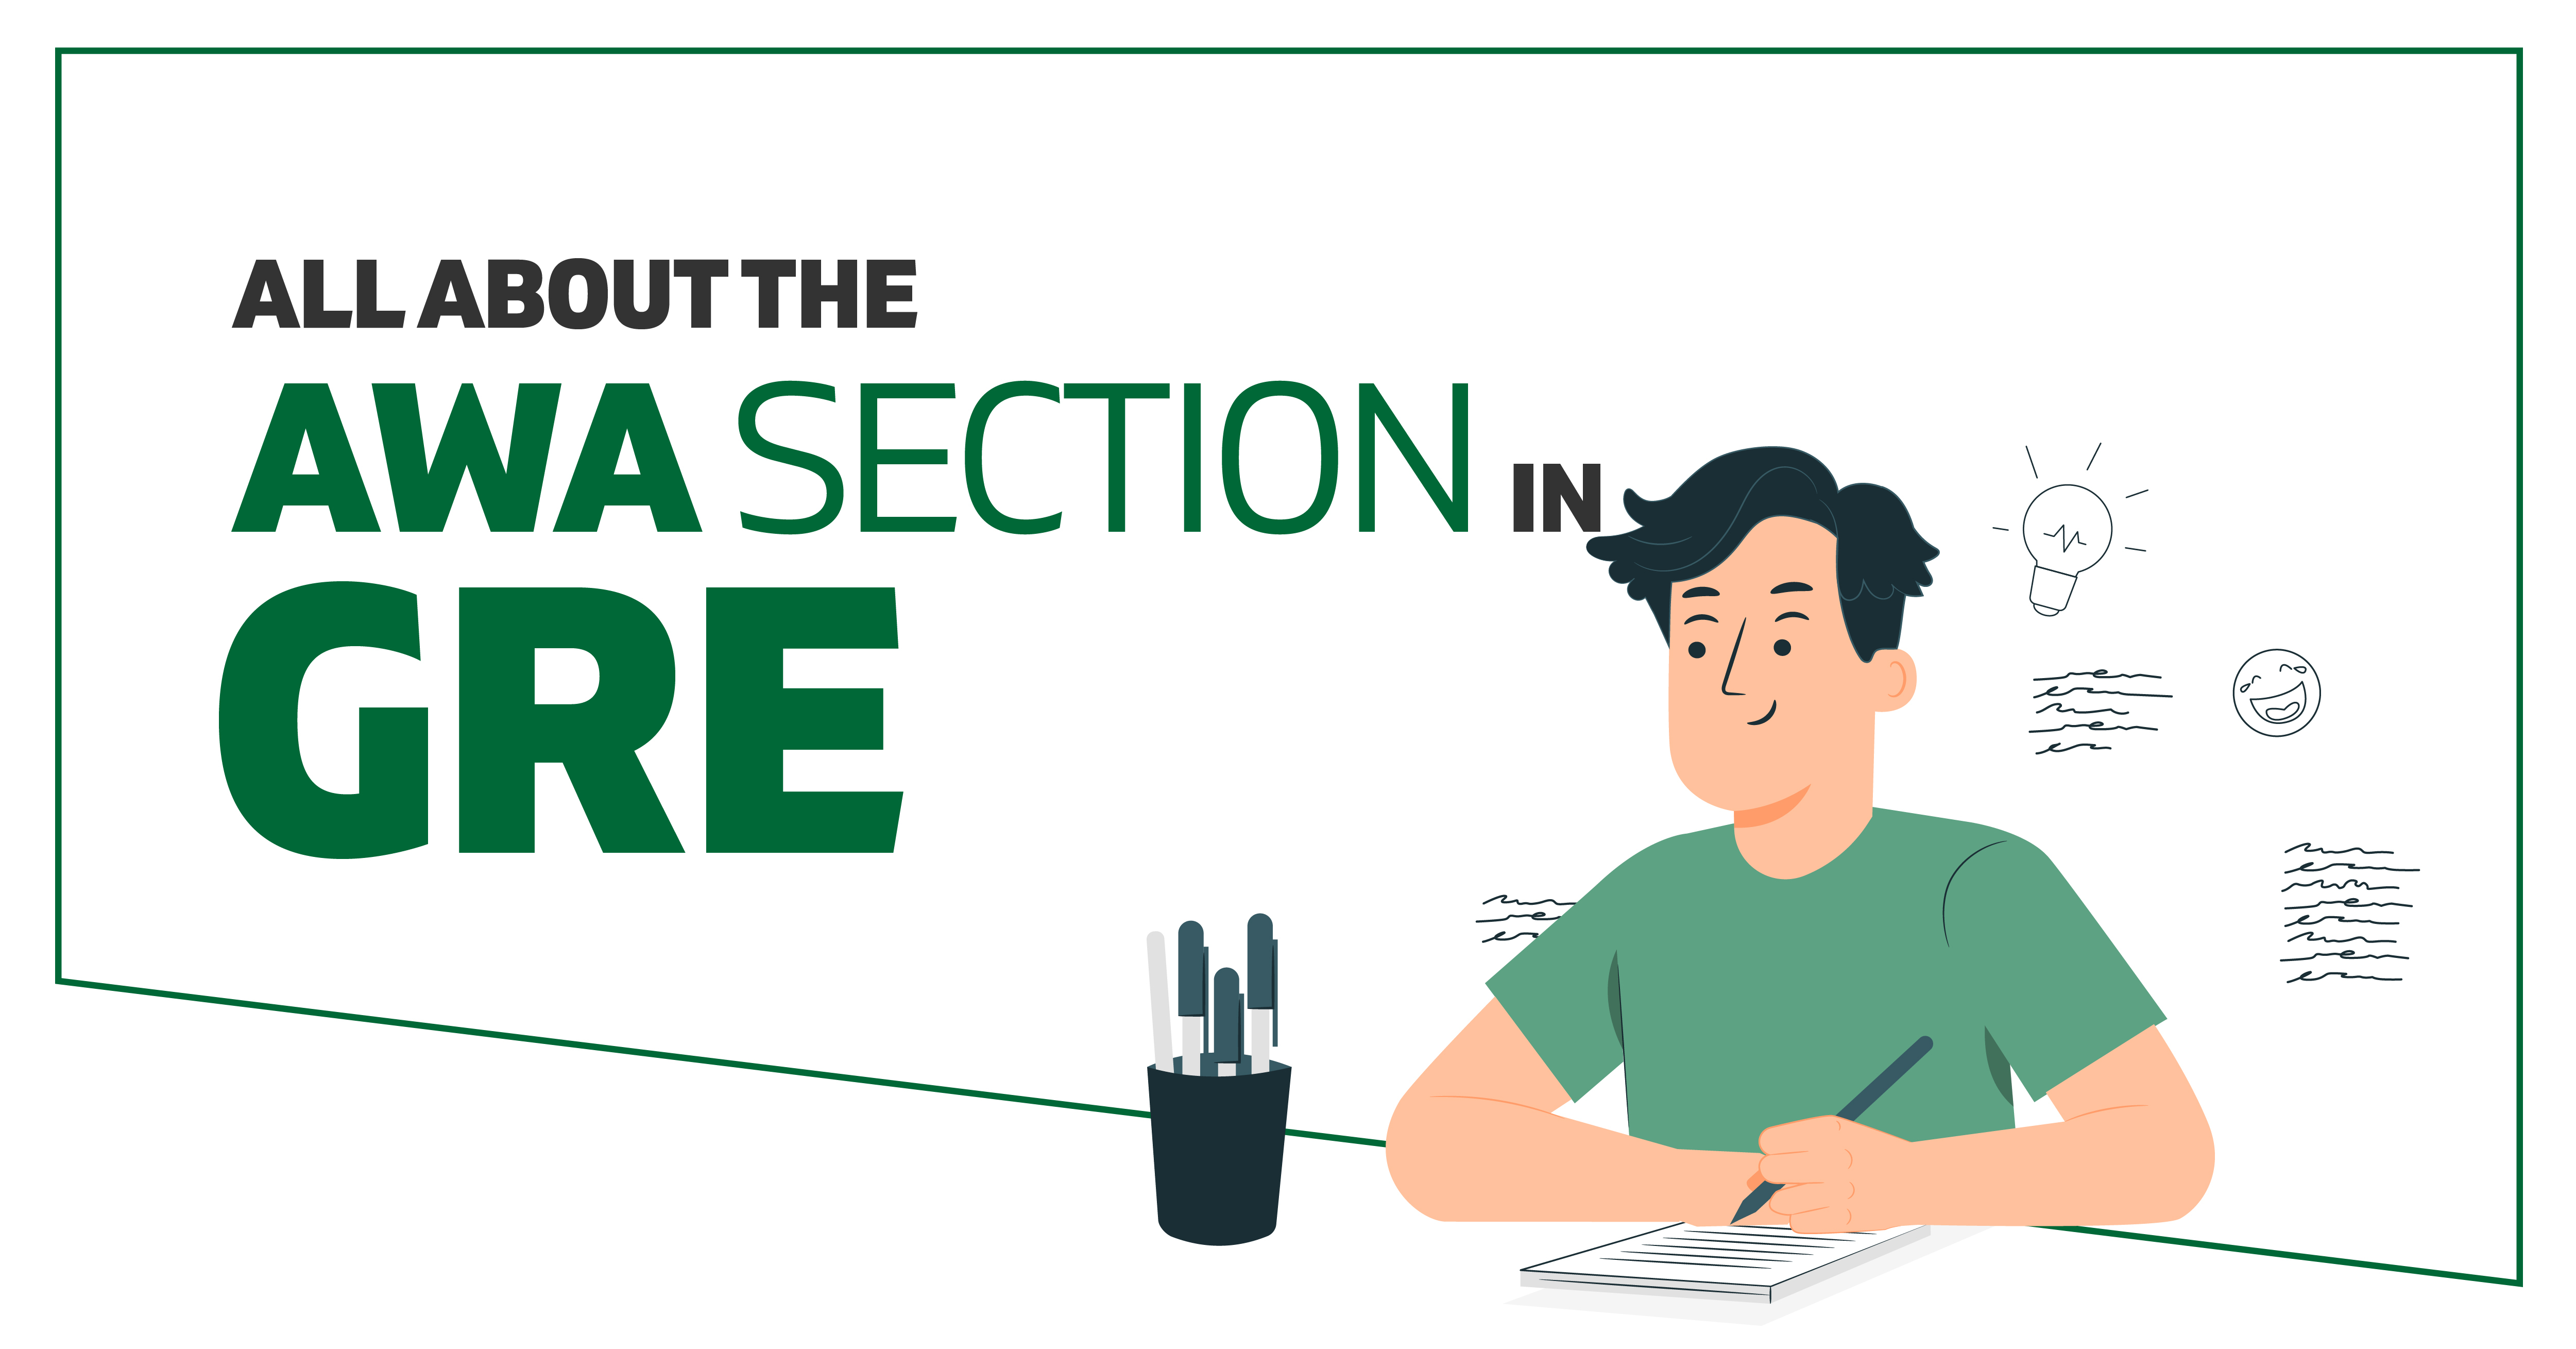 All about the awa section in GRE